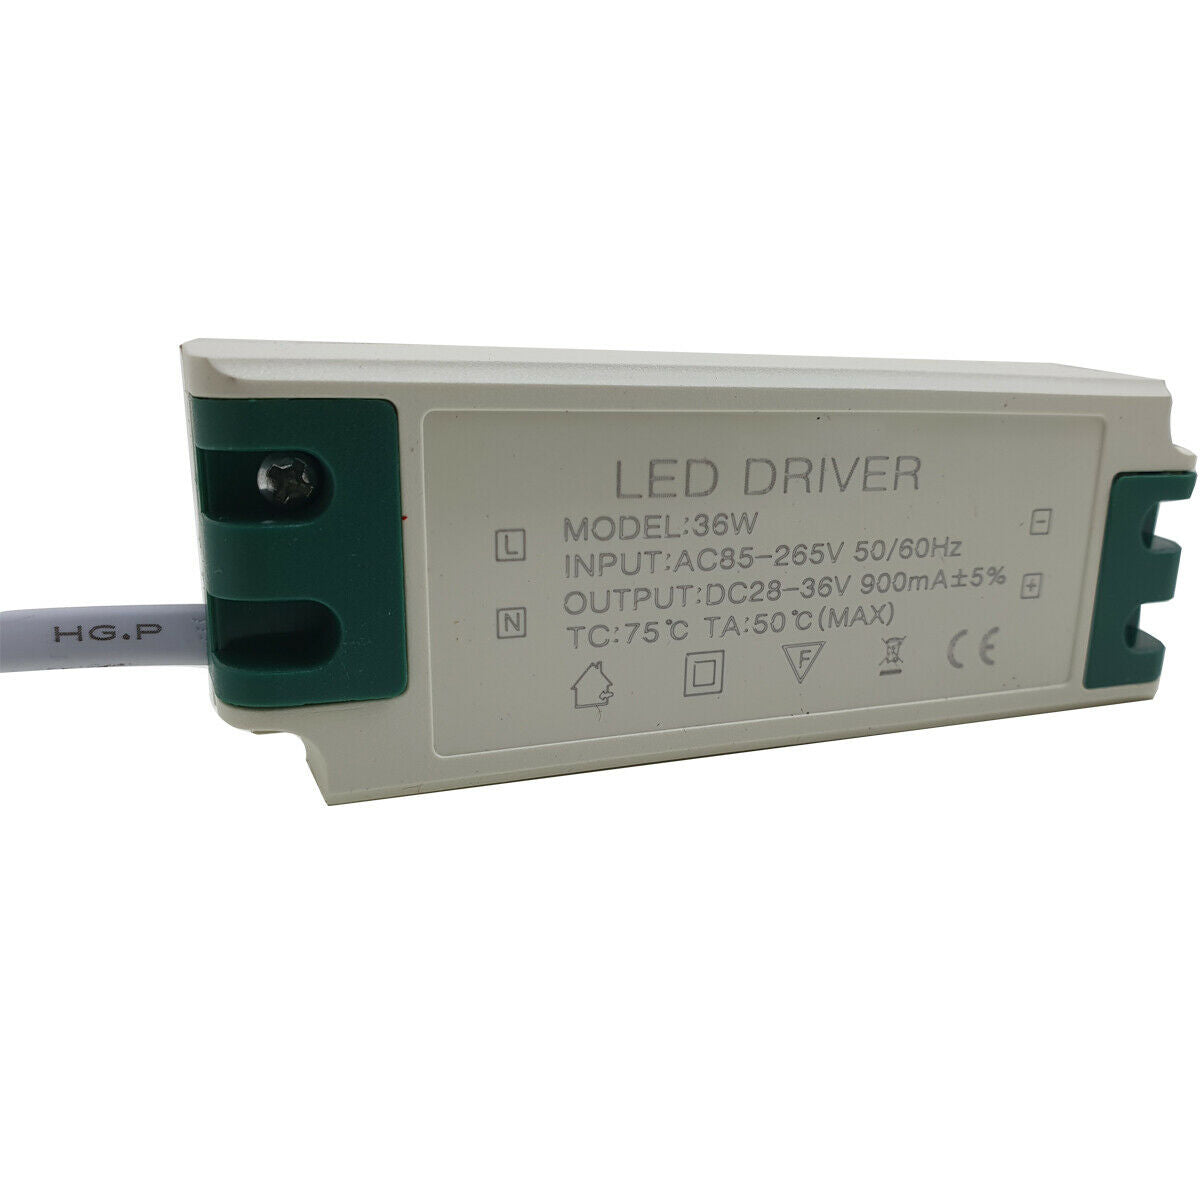 Constant Current 900mA High Power DC Connector Power Supply LED Ceiling light~1063 - LEDSone UK Ltd